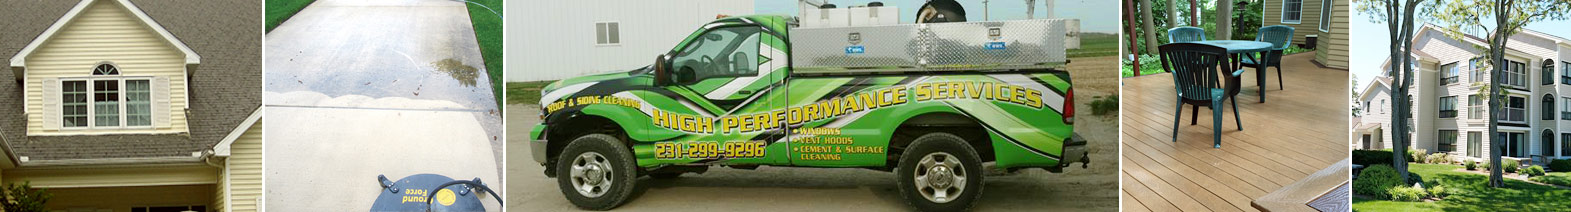 High Performance Services